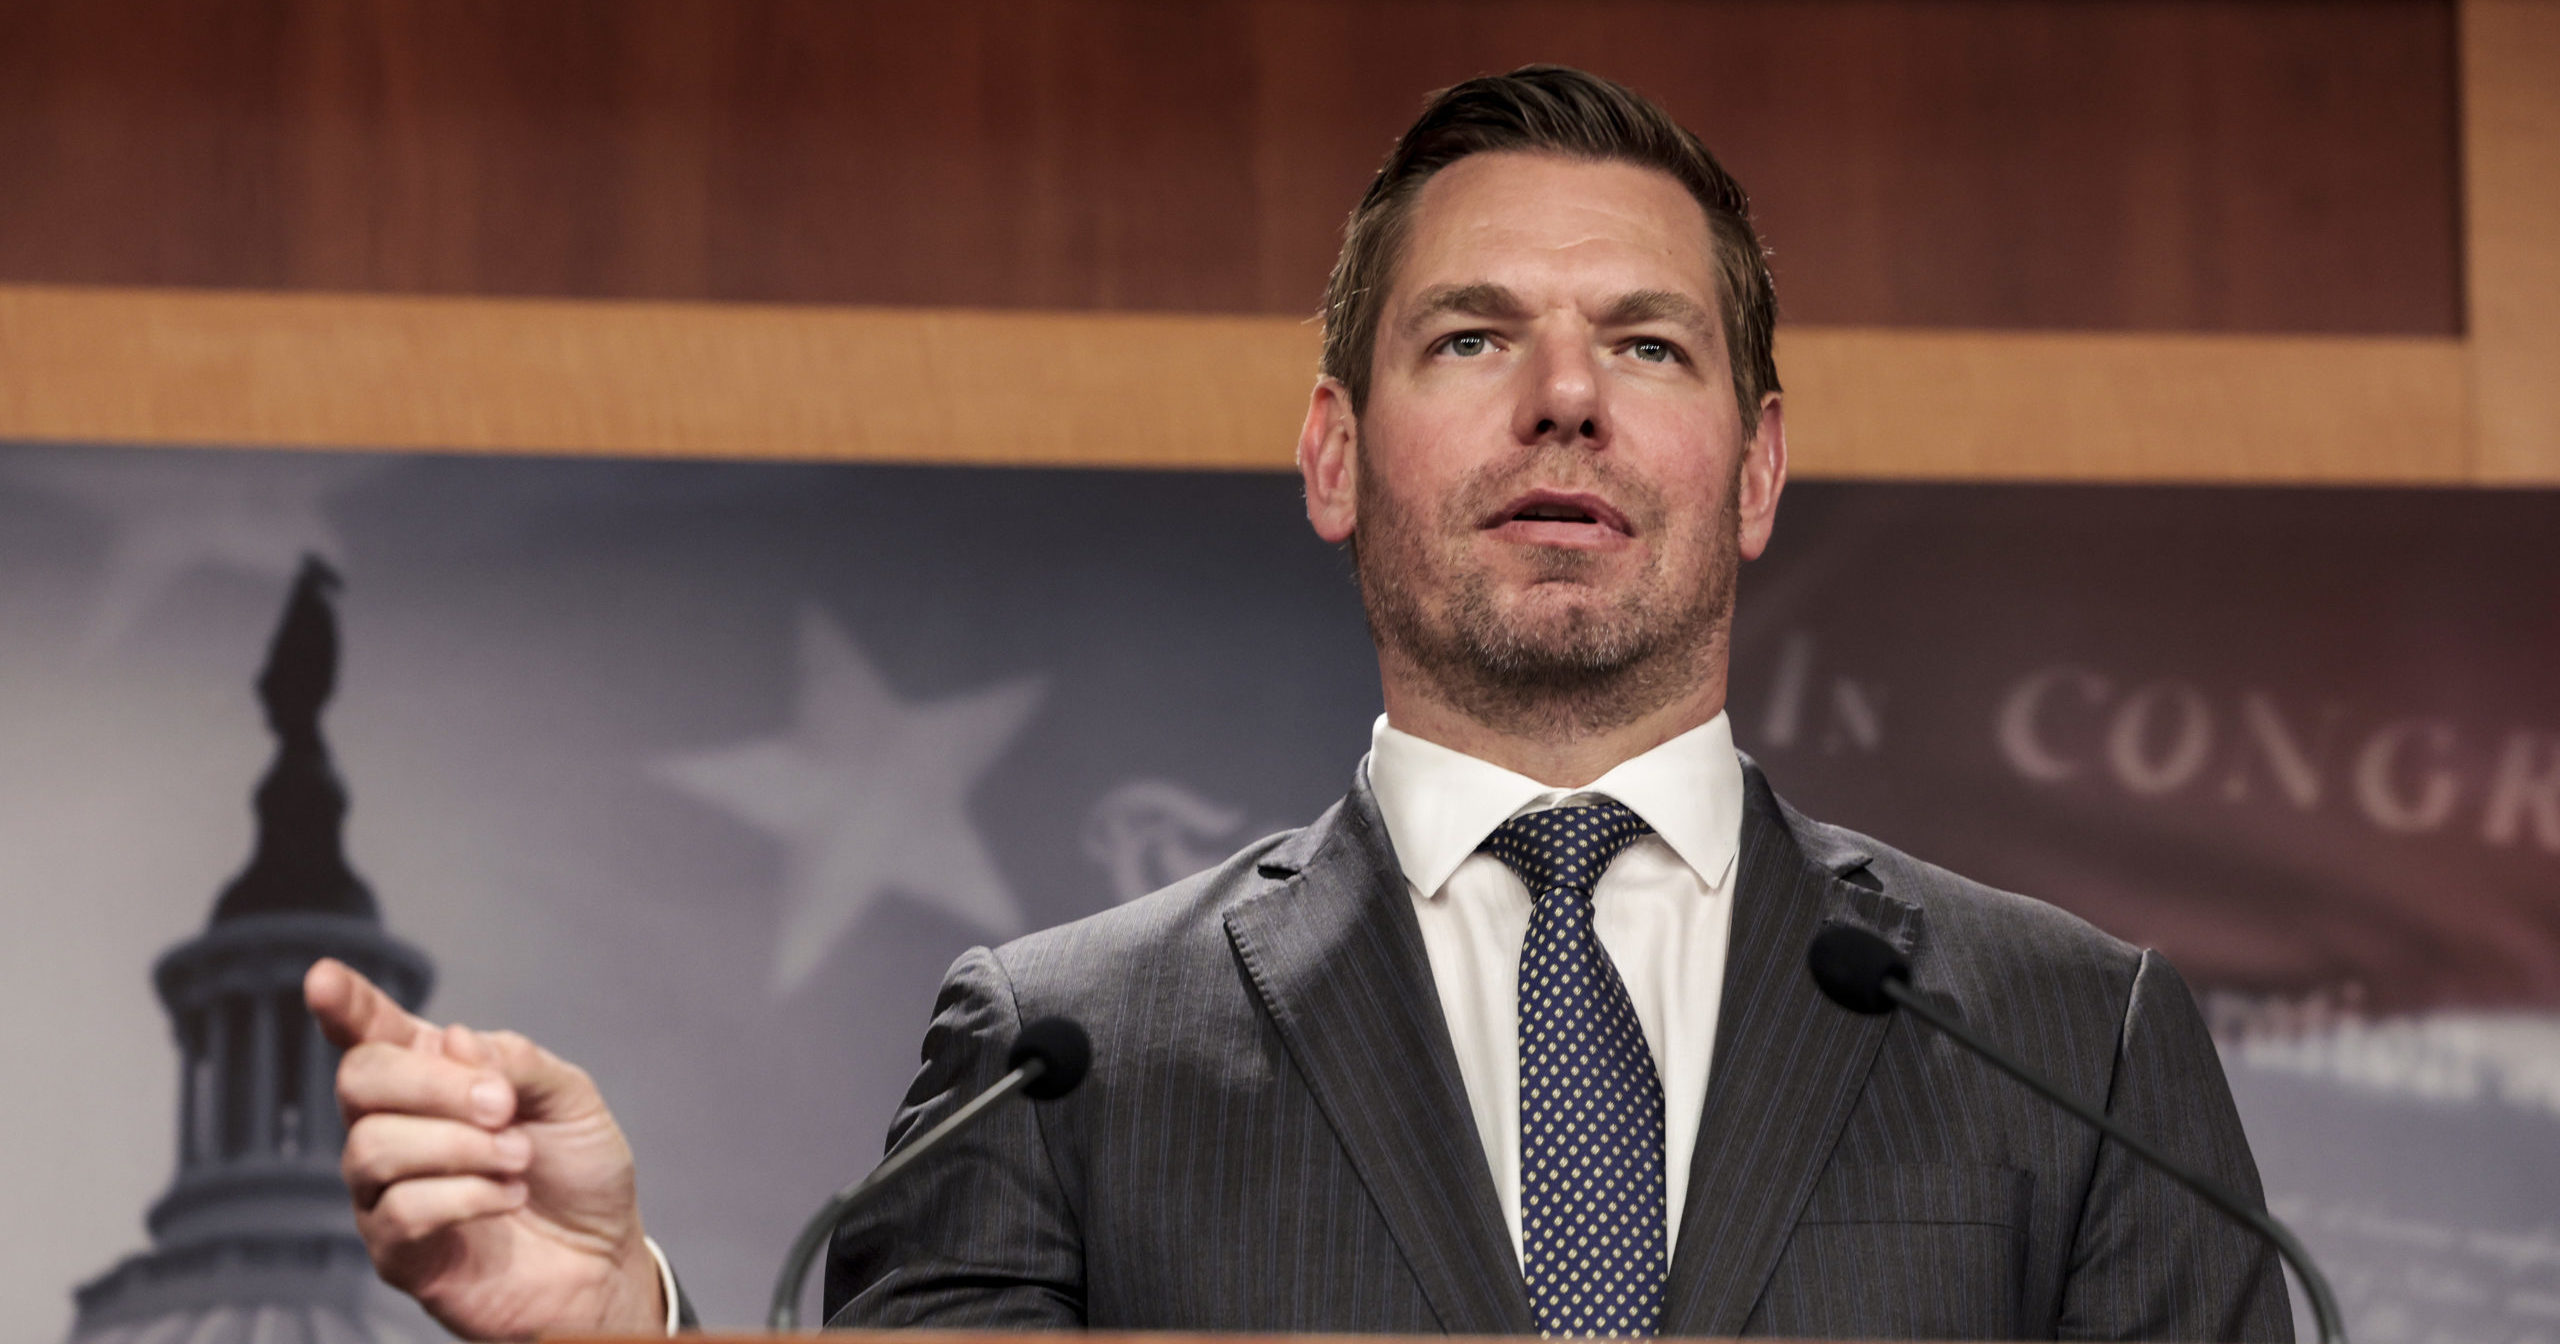 Rep. Eric Swalwell (D-CA) speaks alongside Sen. Jack Reed (D-RI) during a news conference on the introduction of their Protection from Abusive Passengers Act at the U.S. Capitol Building on April 6, 2022 in Washington, DC.